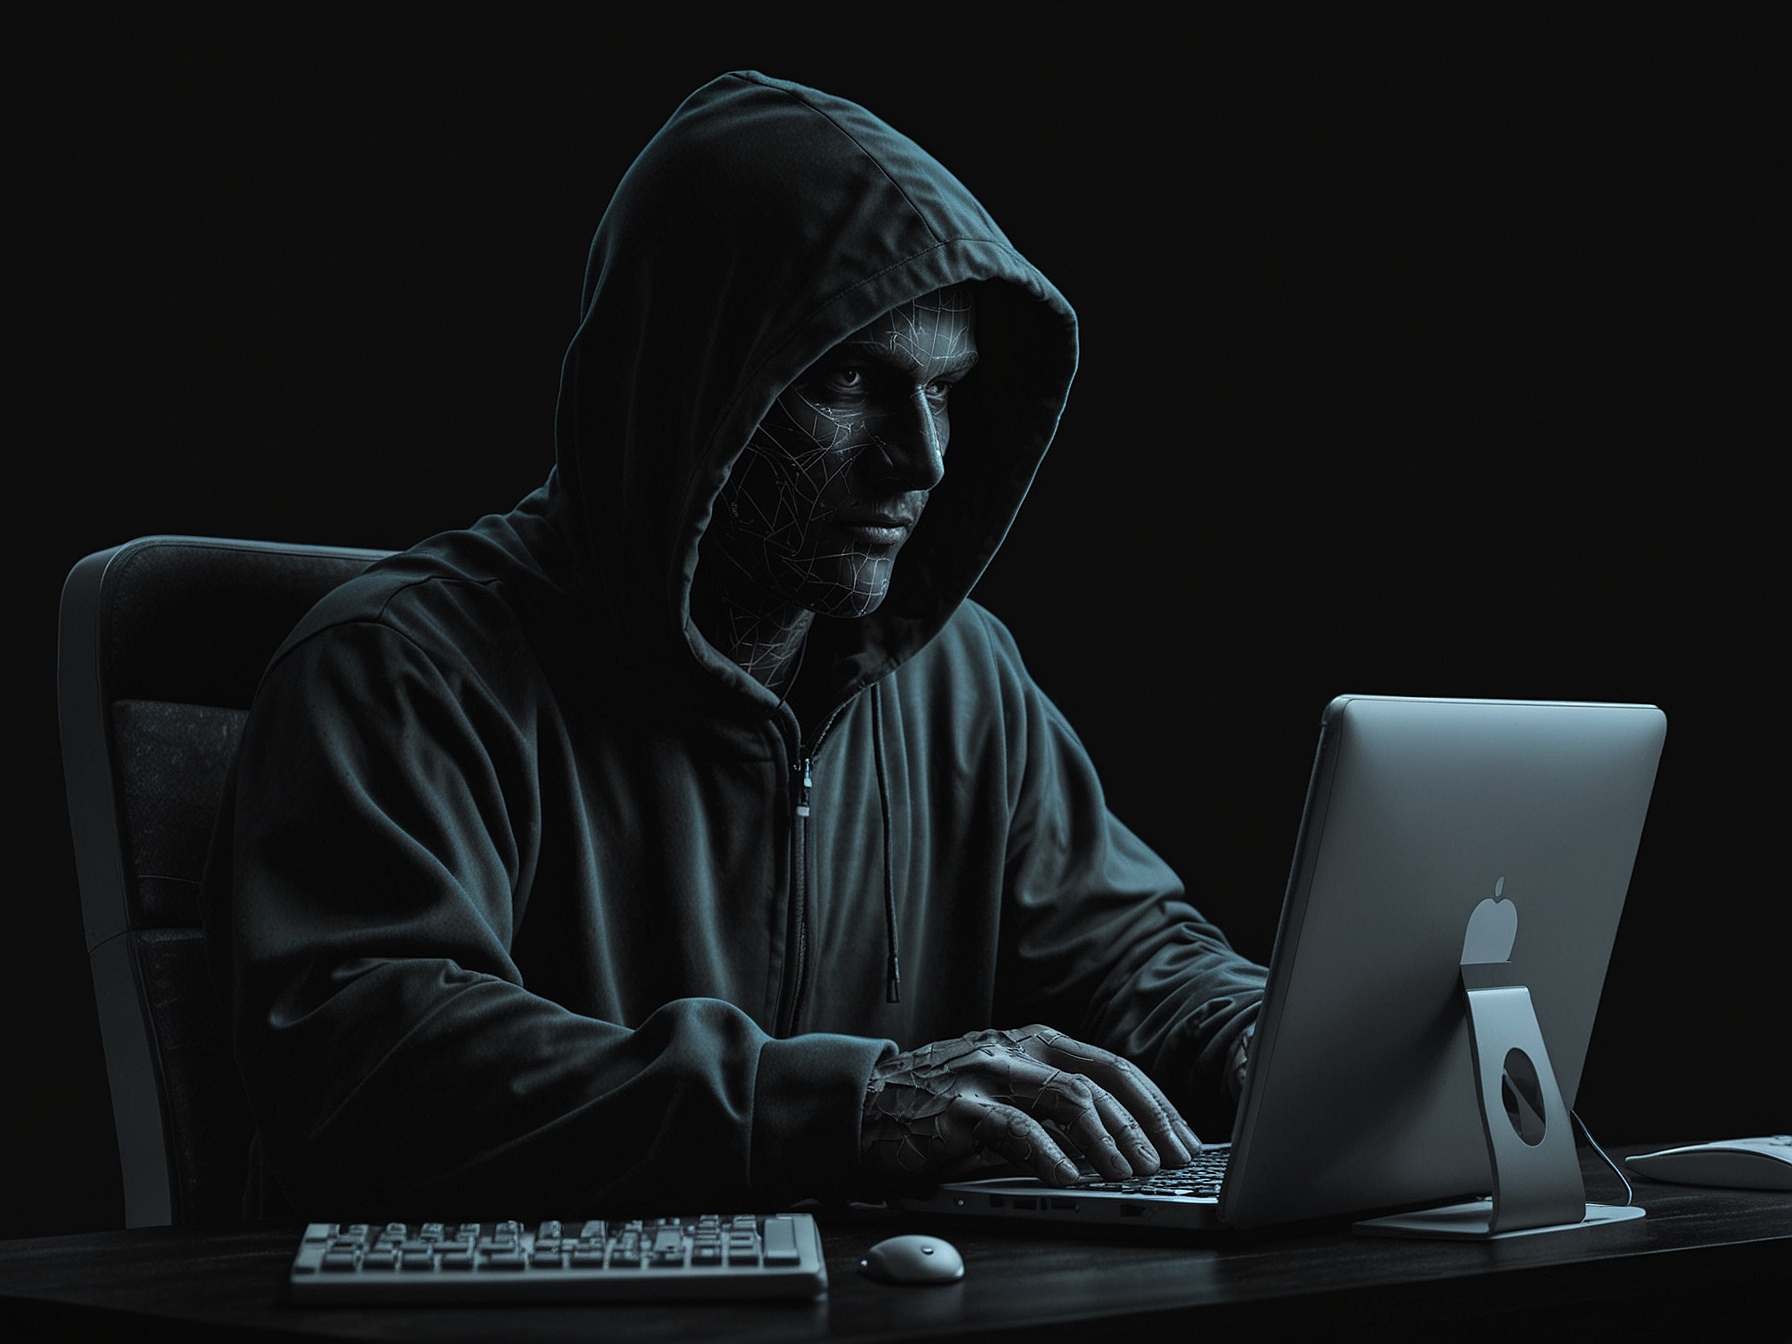 A graphical representation of a hacker in a dark hooded outfit on a computer screen, symbolizing the alleged breach attempt by IntelBroker and the ensuing scrutiny in the cybersecurity community.